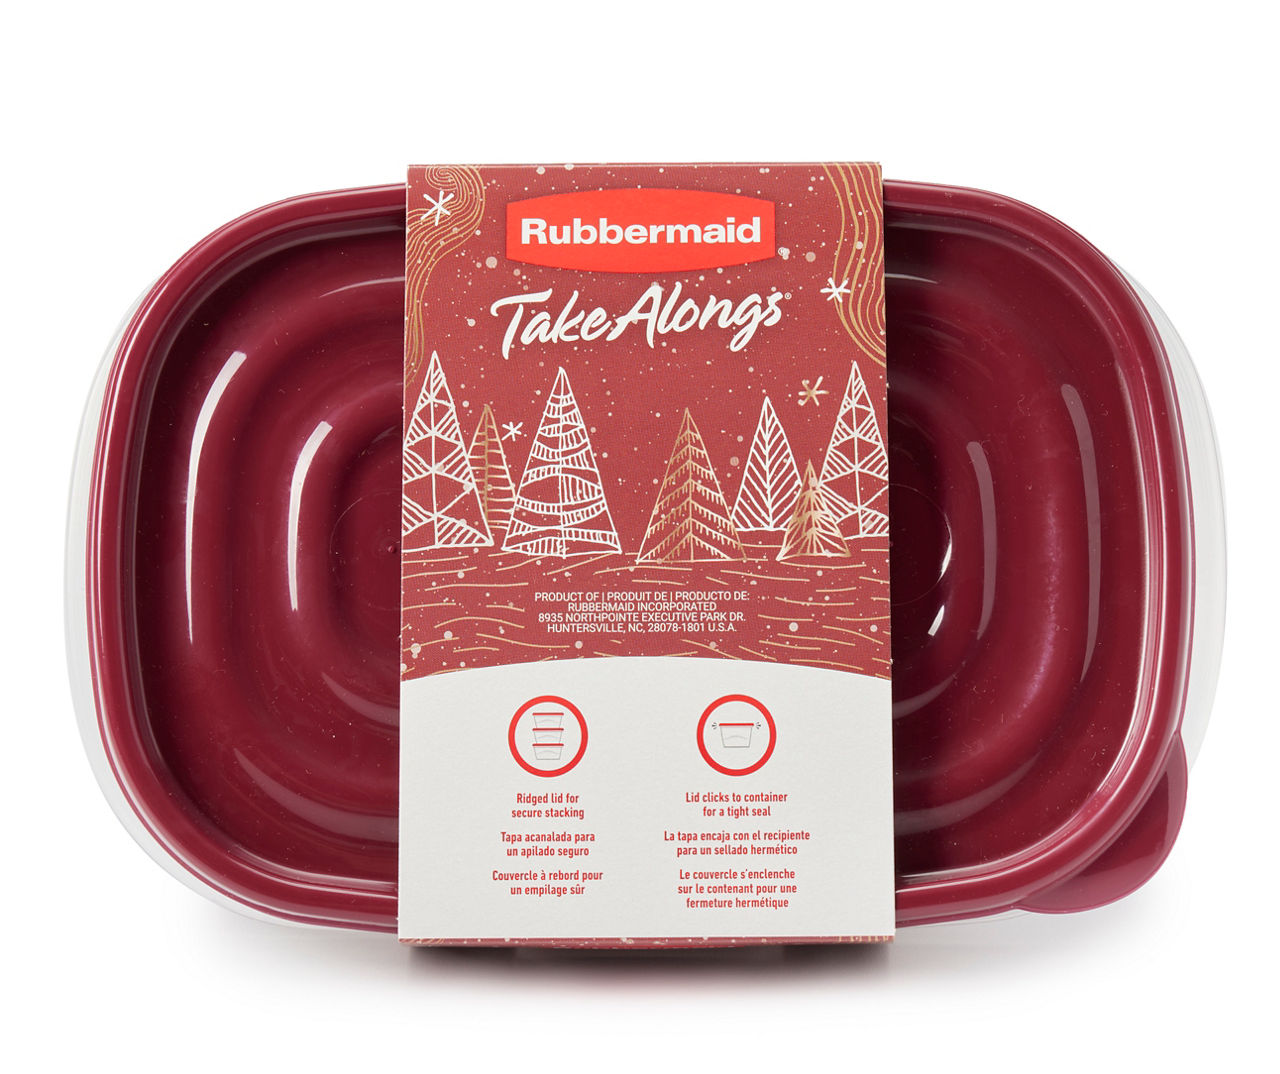 Rubbermaid TakeAlongs Rhubarb 1 Gallon Rectangle 2-Container Storage Set